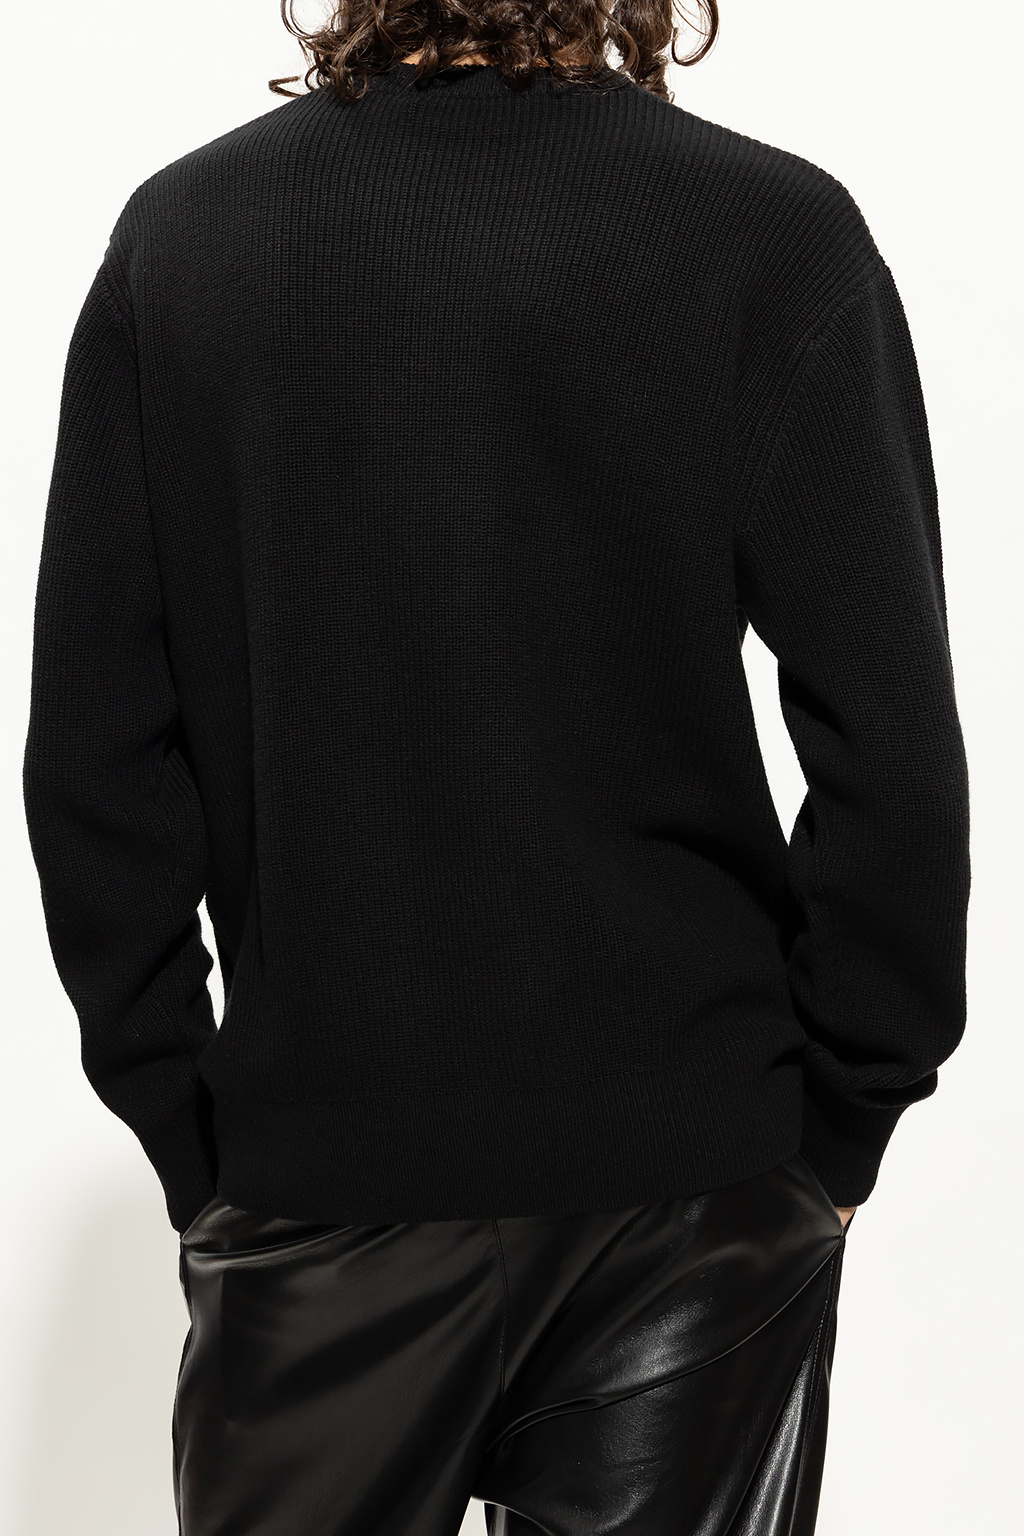 Etudes Ribbed Hooded sweater